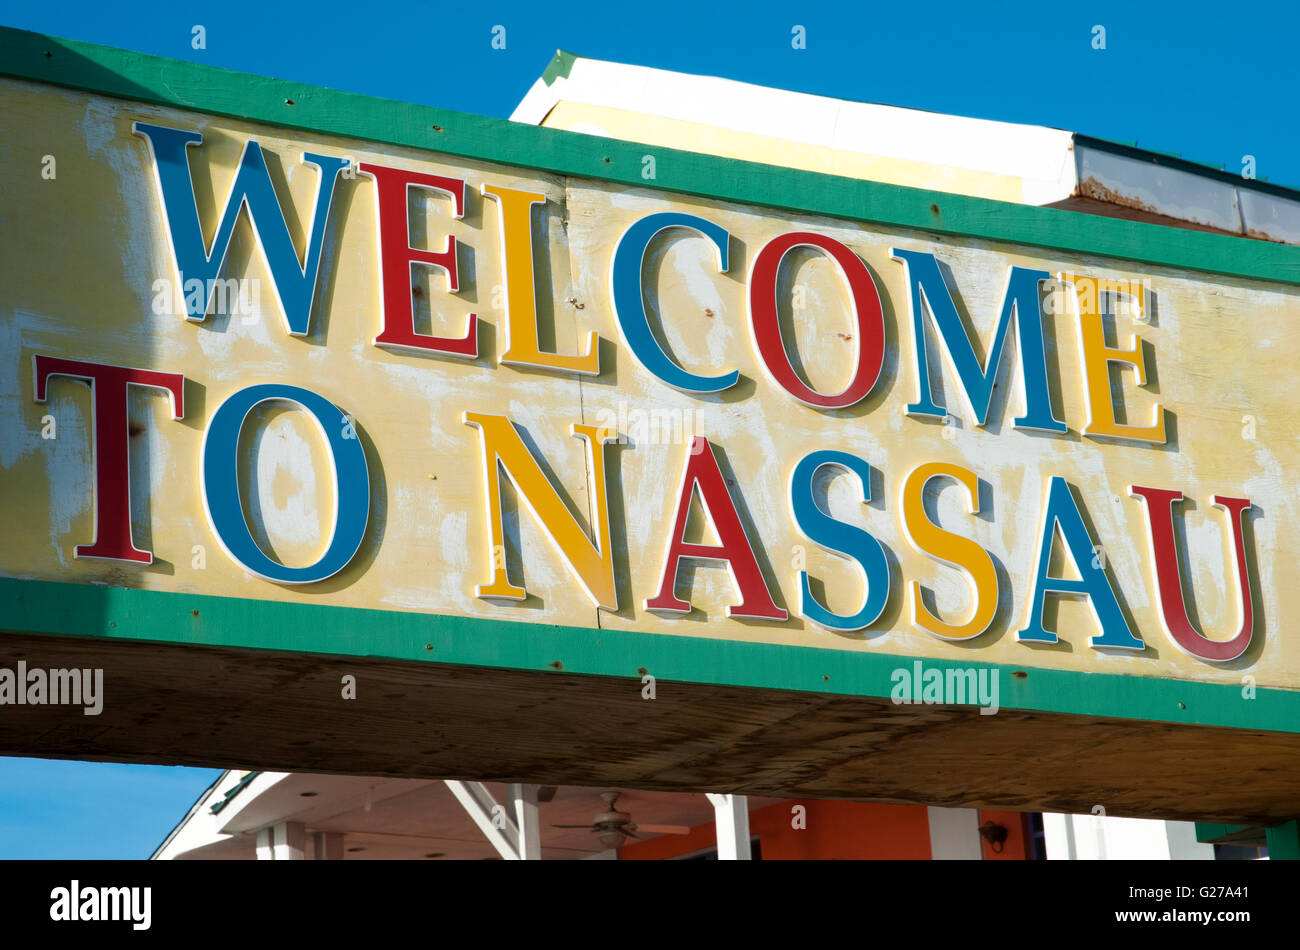 The welcome sign to Nassau city, one of the most popular ports of call in Caribbean (The Bahamas). Stock Photo